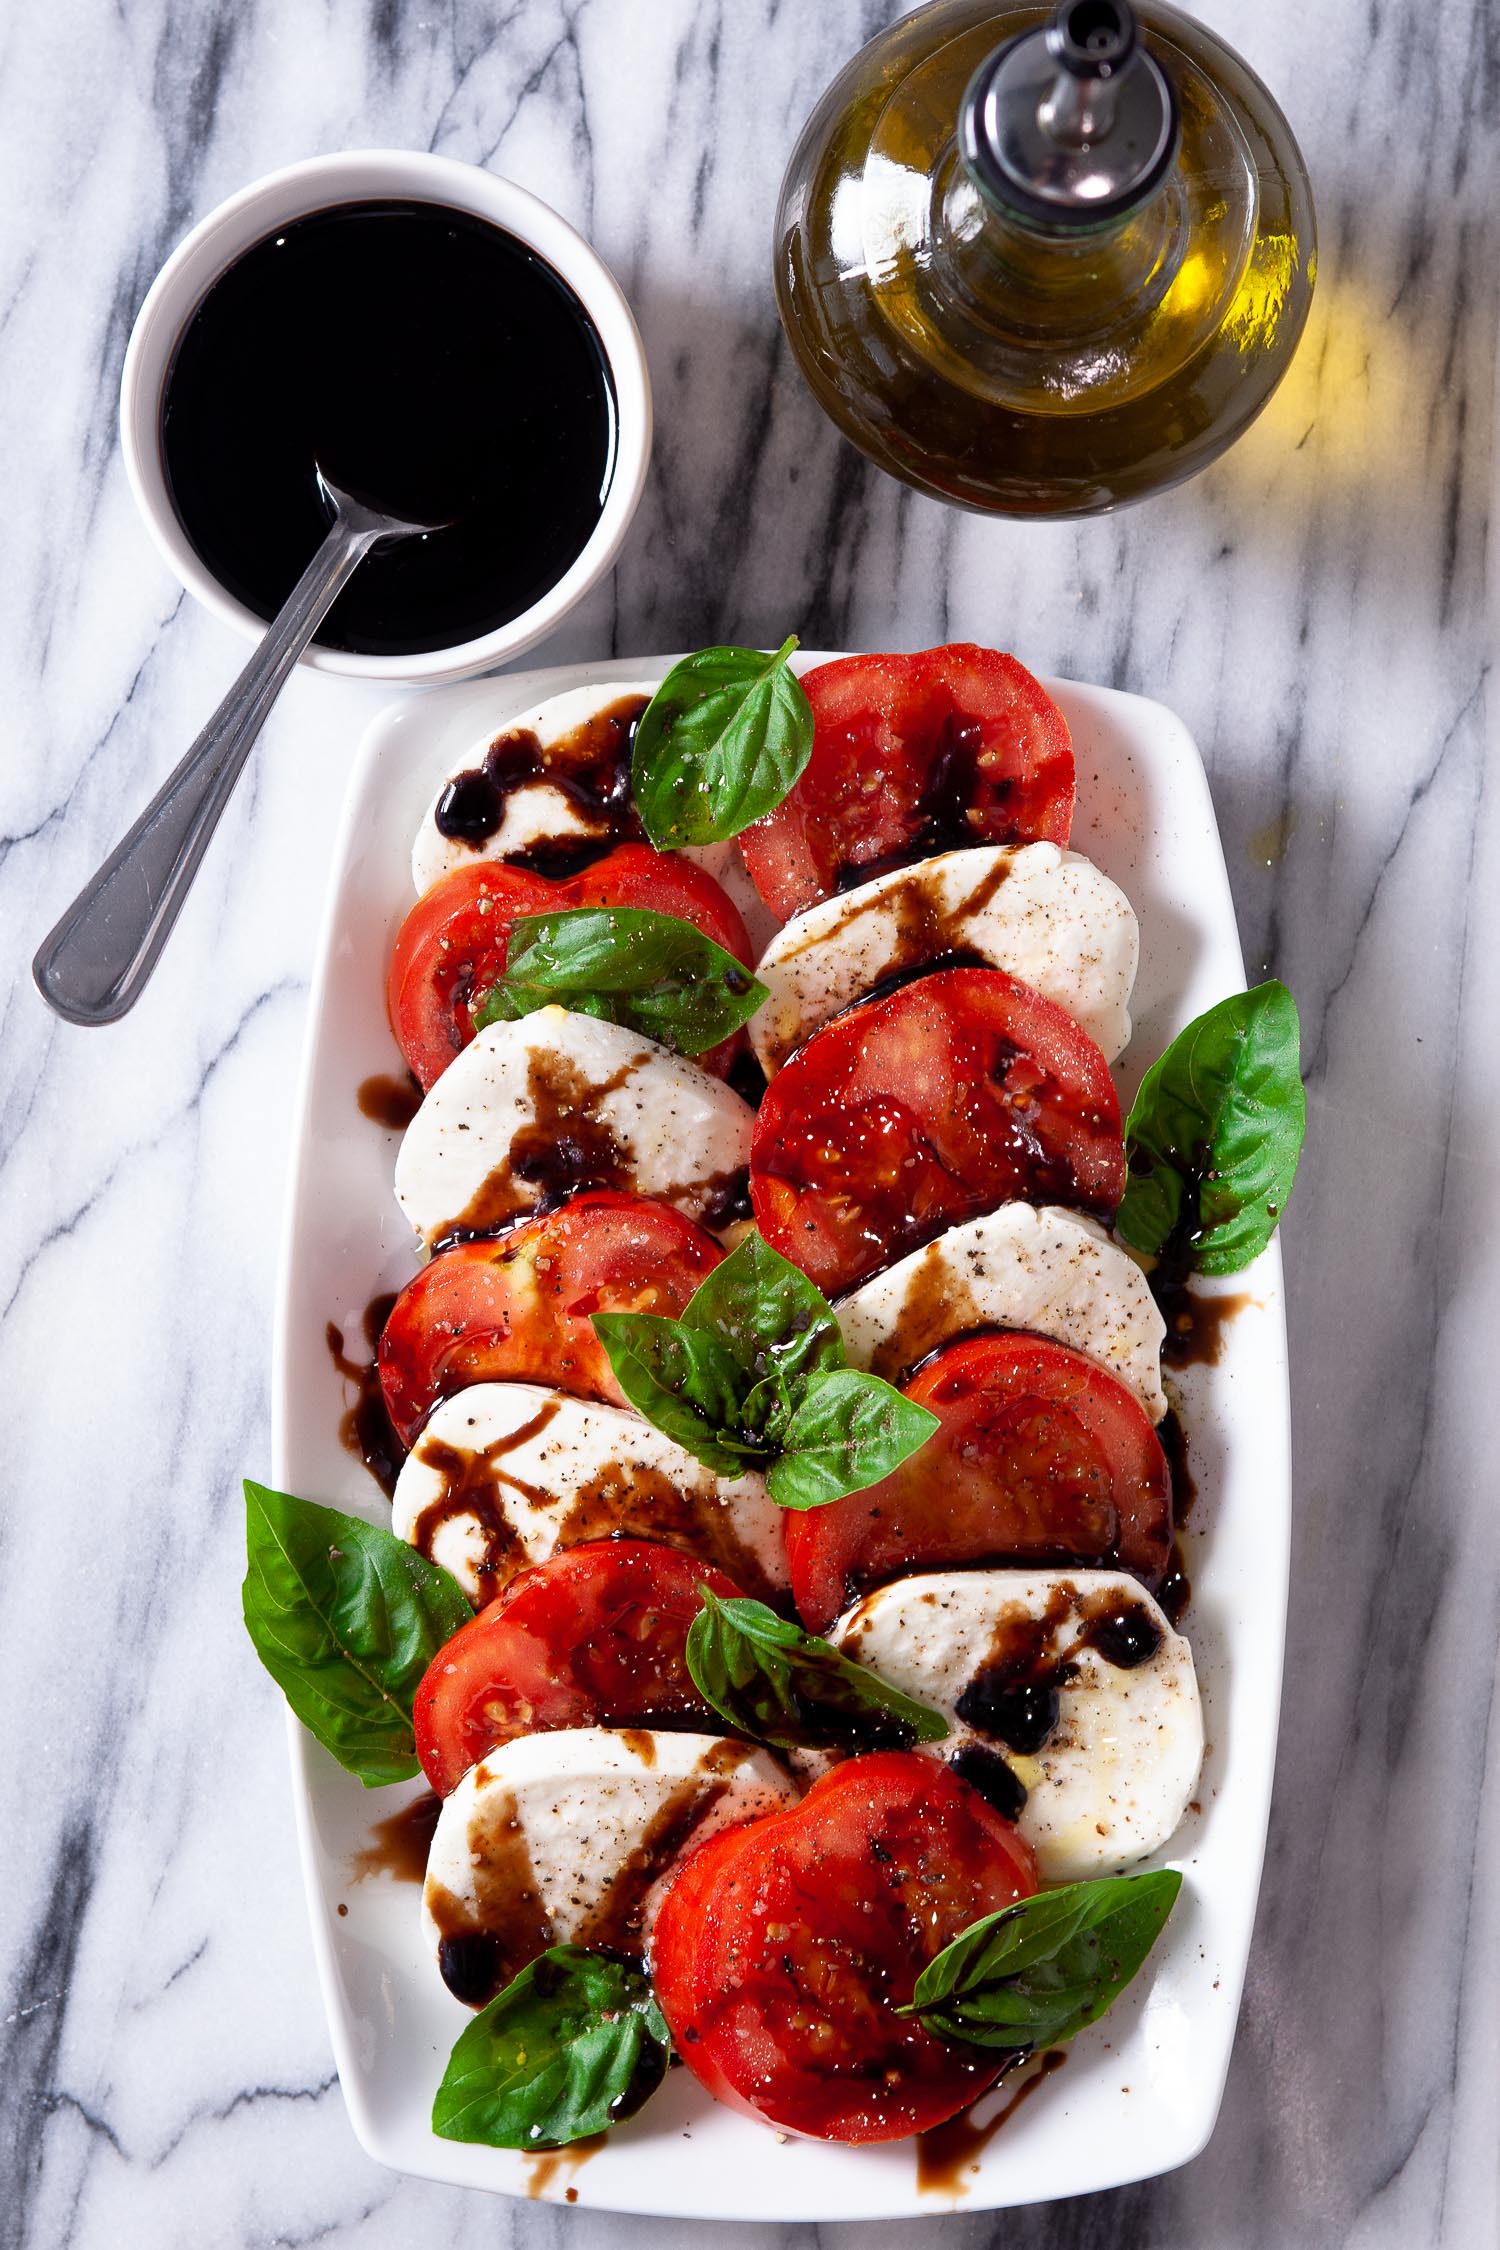 Caprese salad on a white rectangular plate with balsamic and olive oil on the side